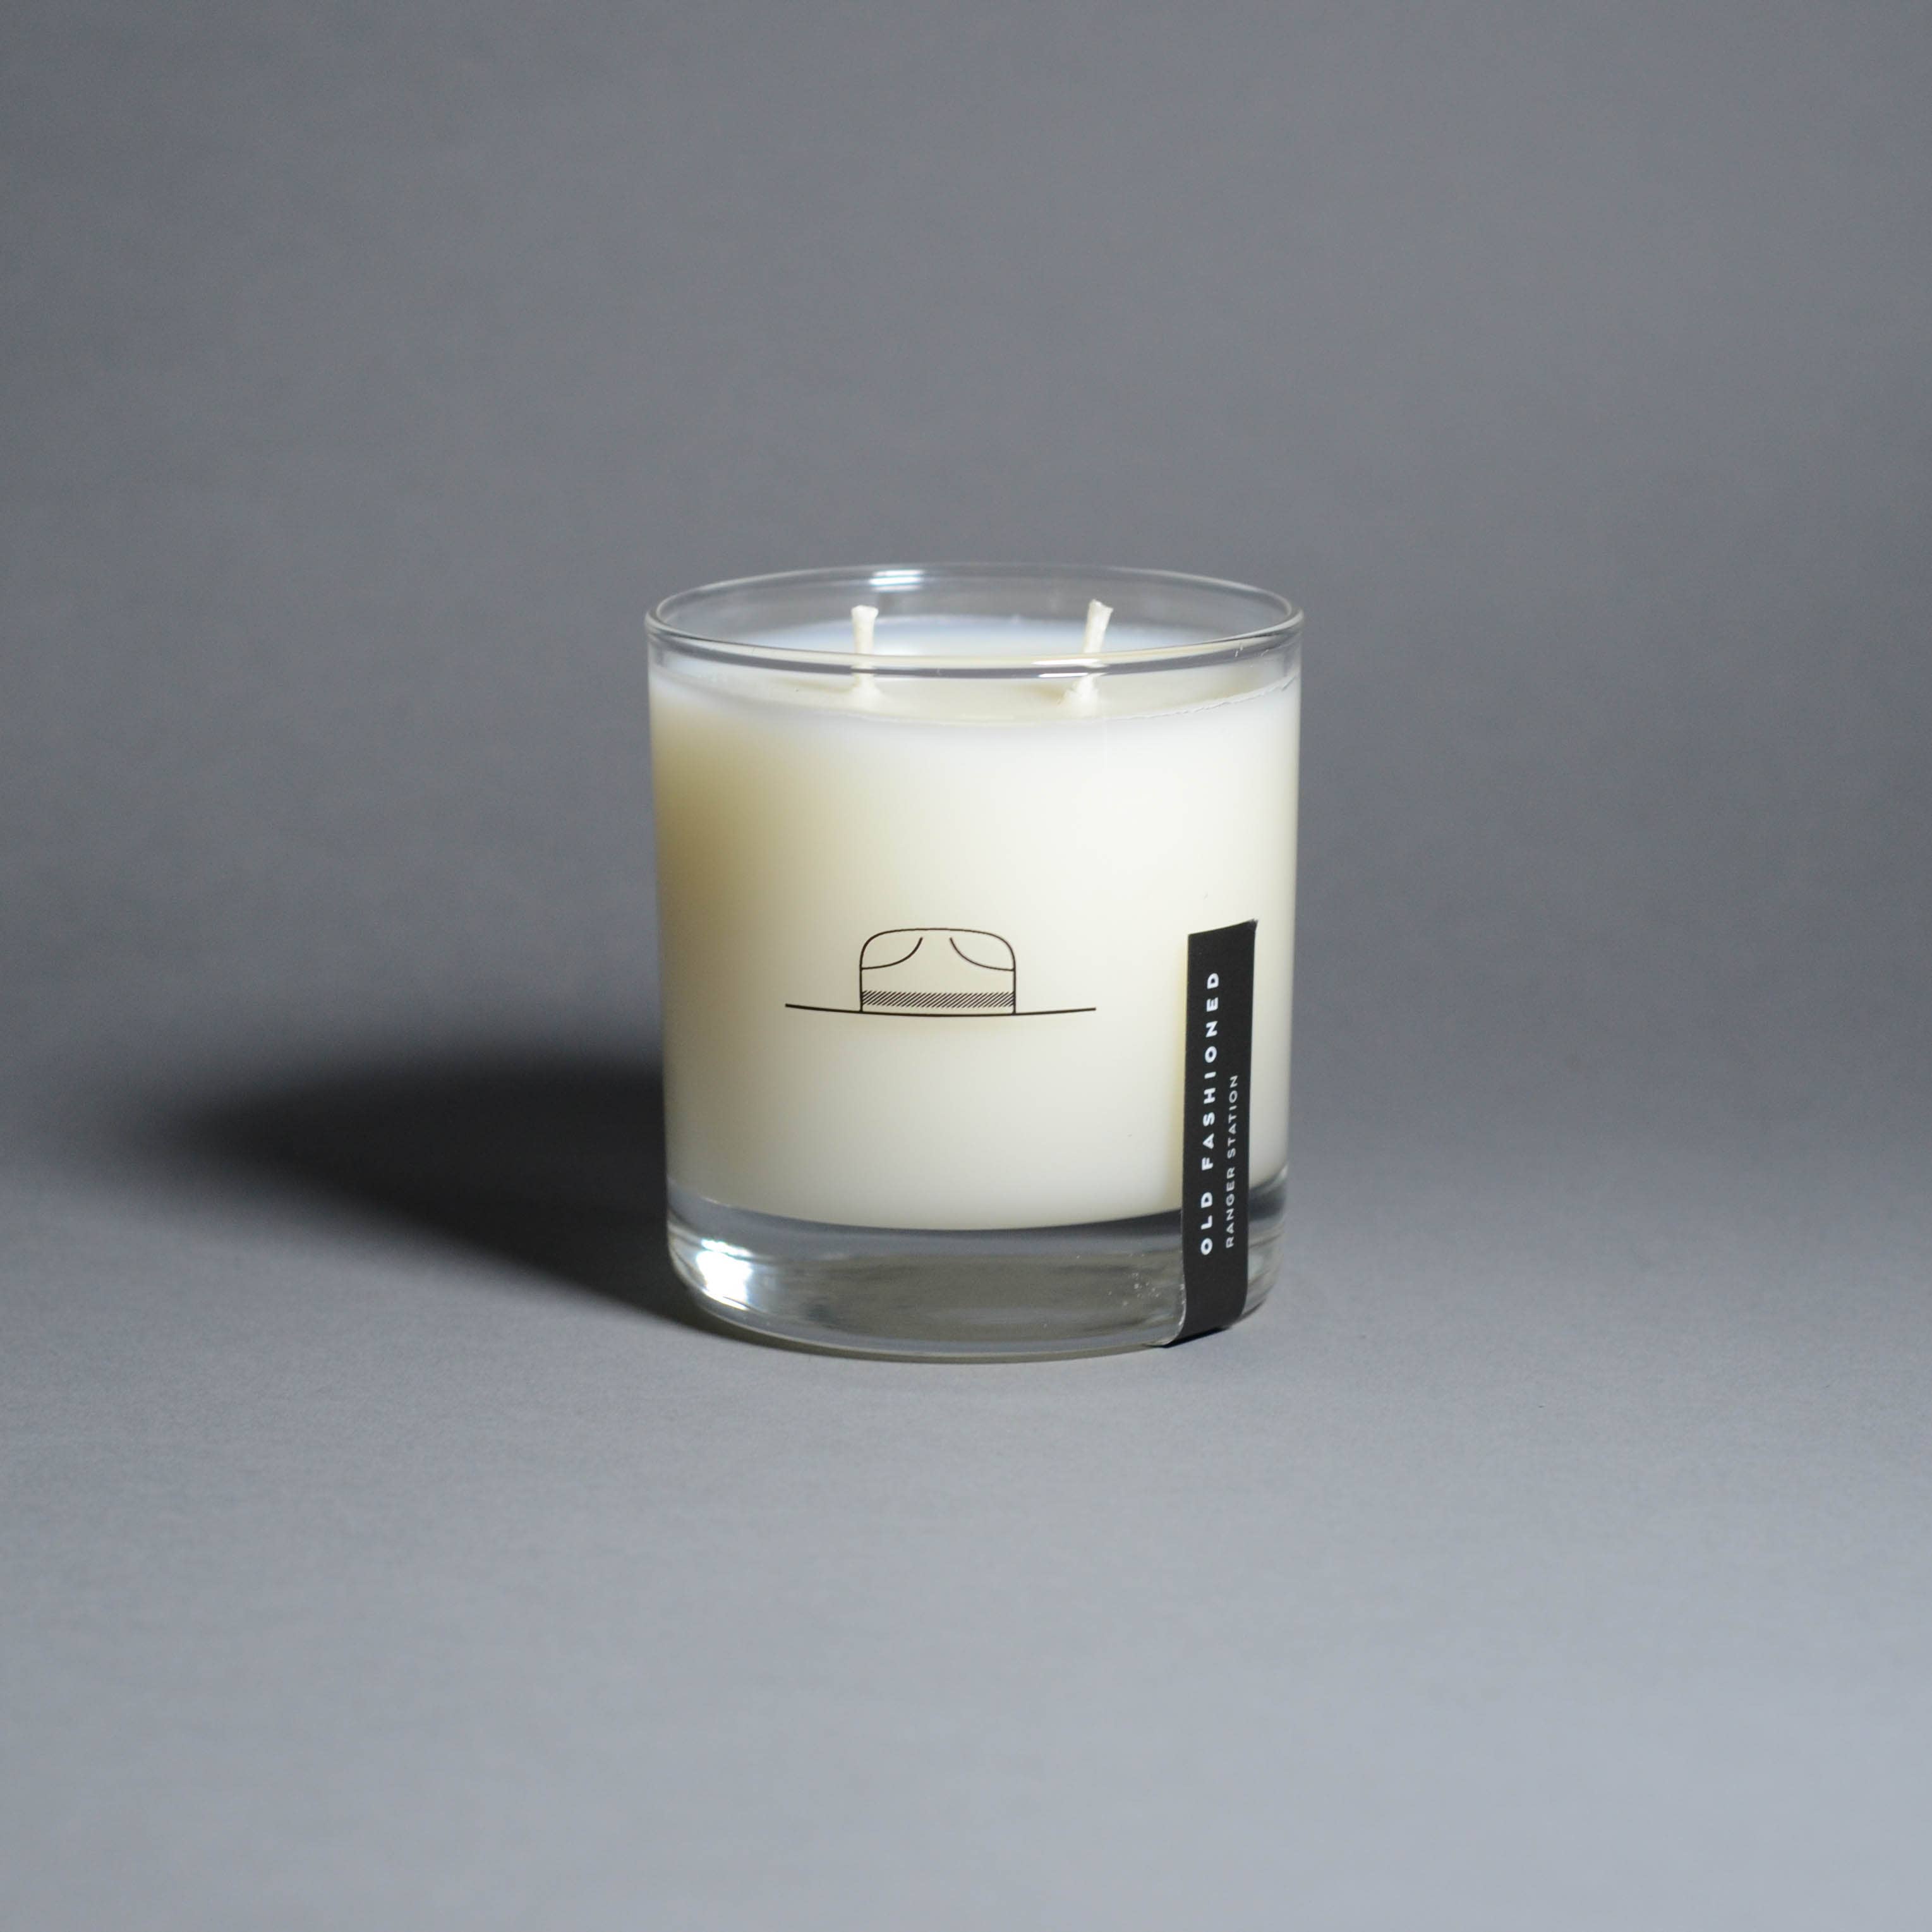 Ranger Station - Old Fashioned Candle